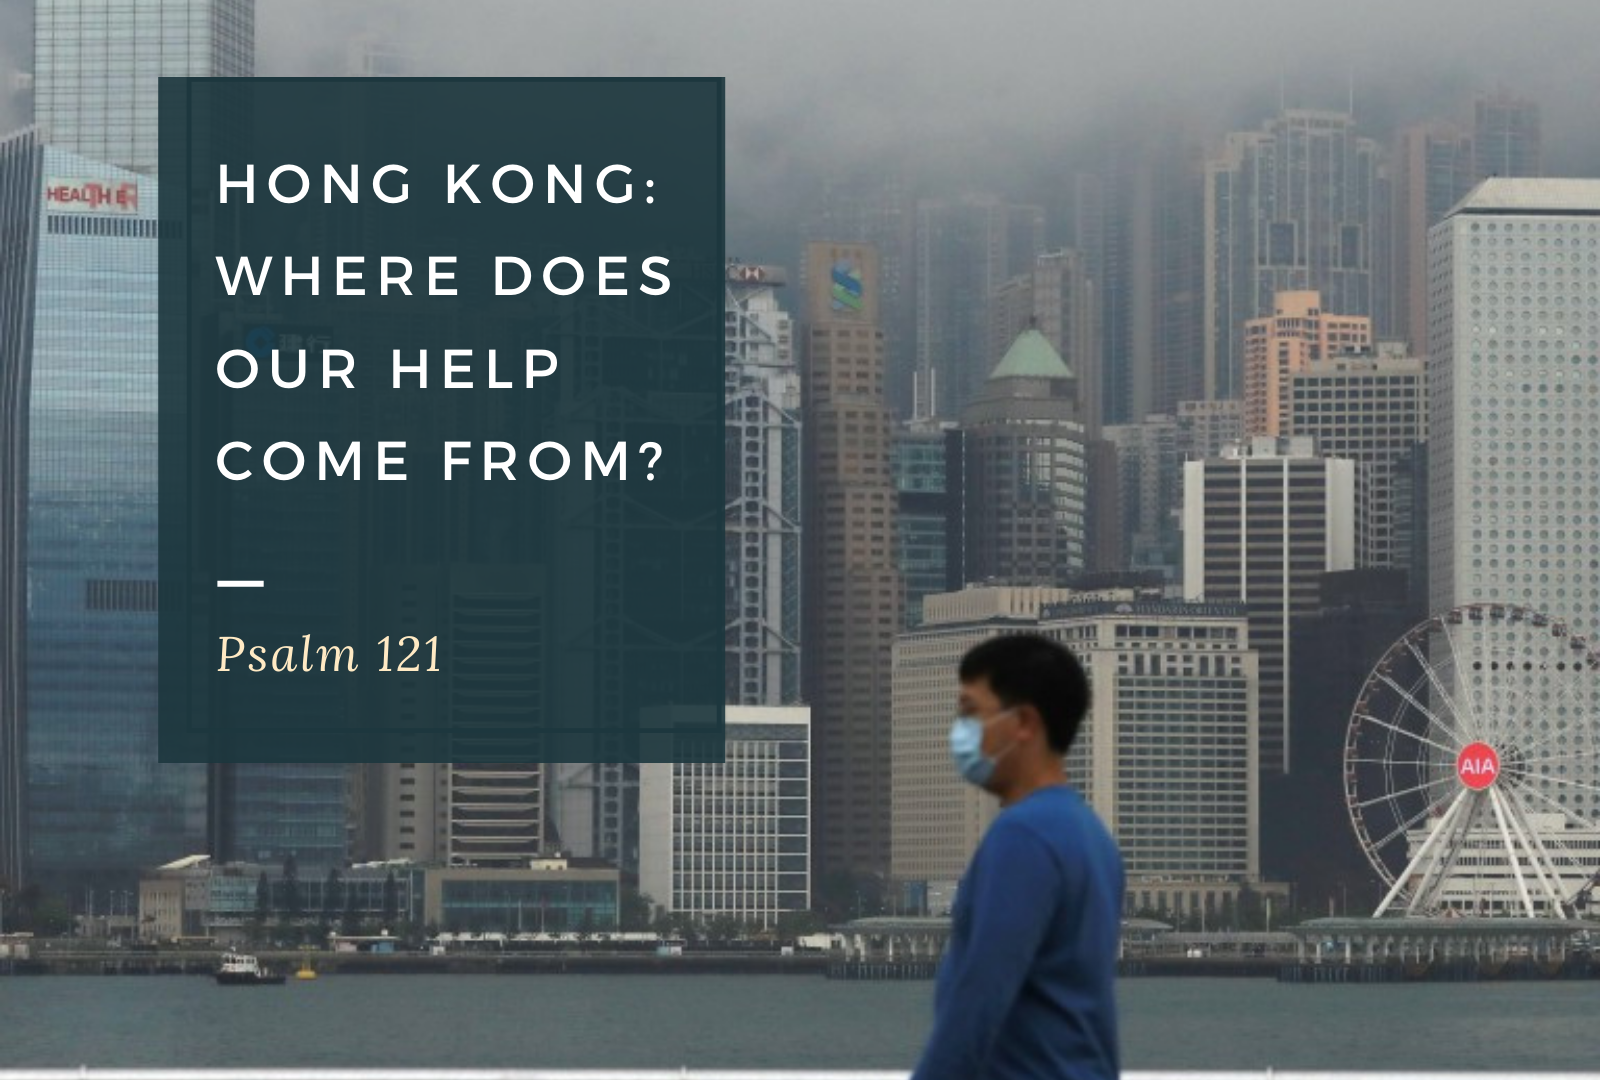 Hong Kong: Where Does Our Help Come From?